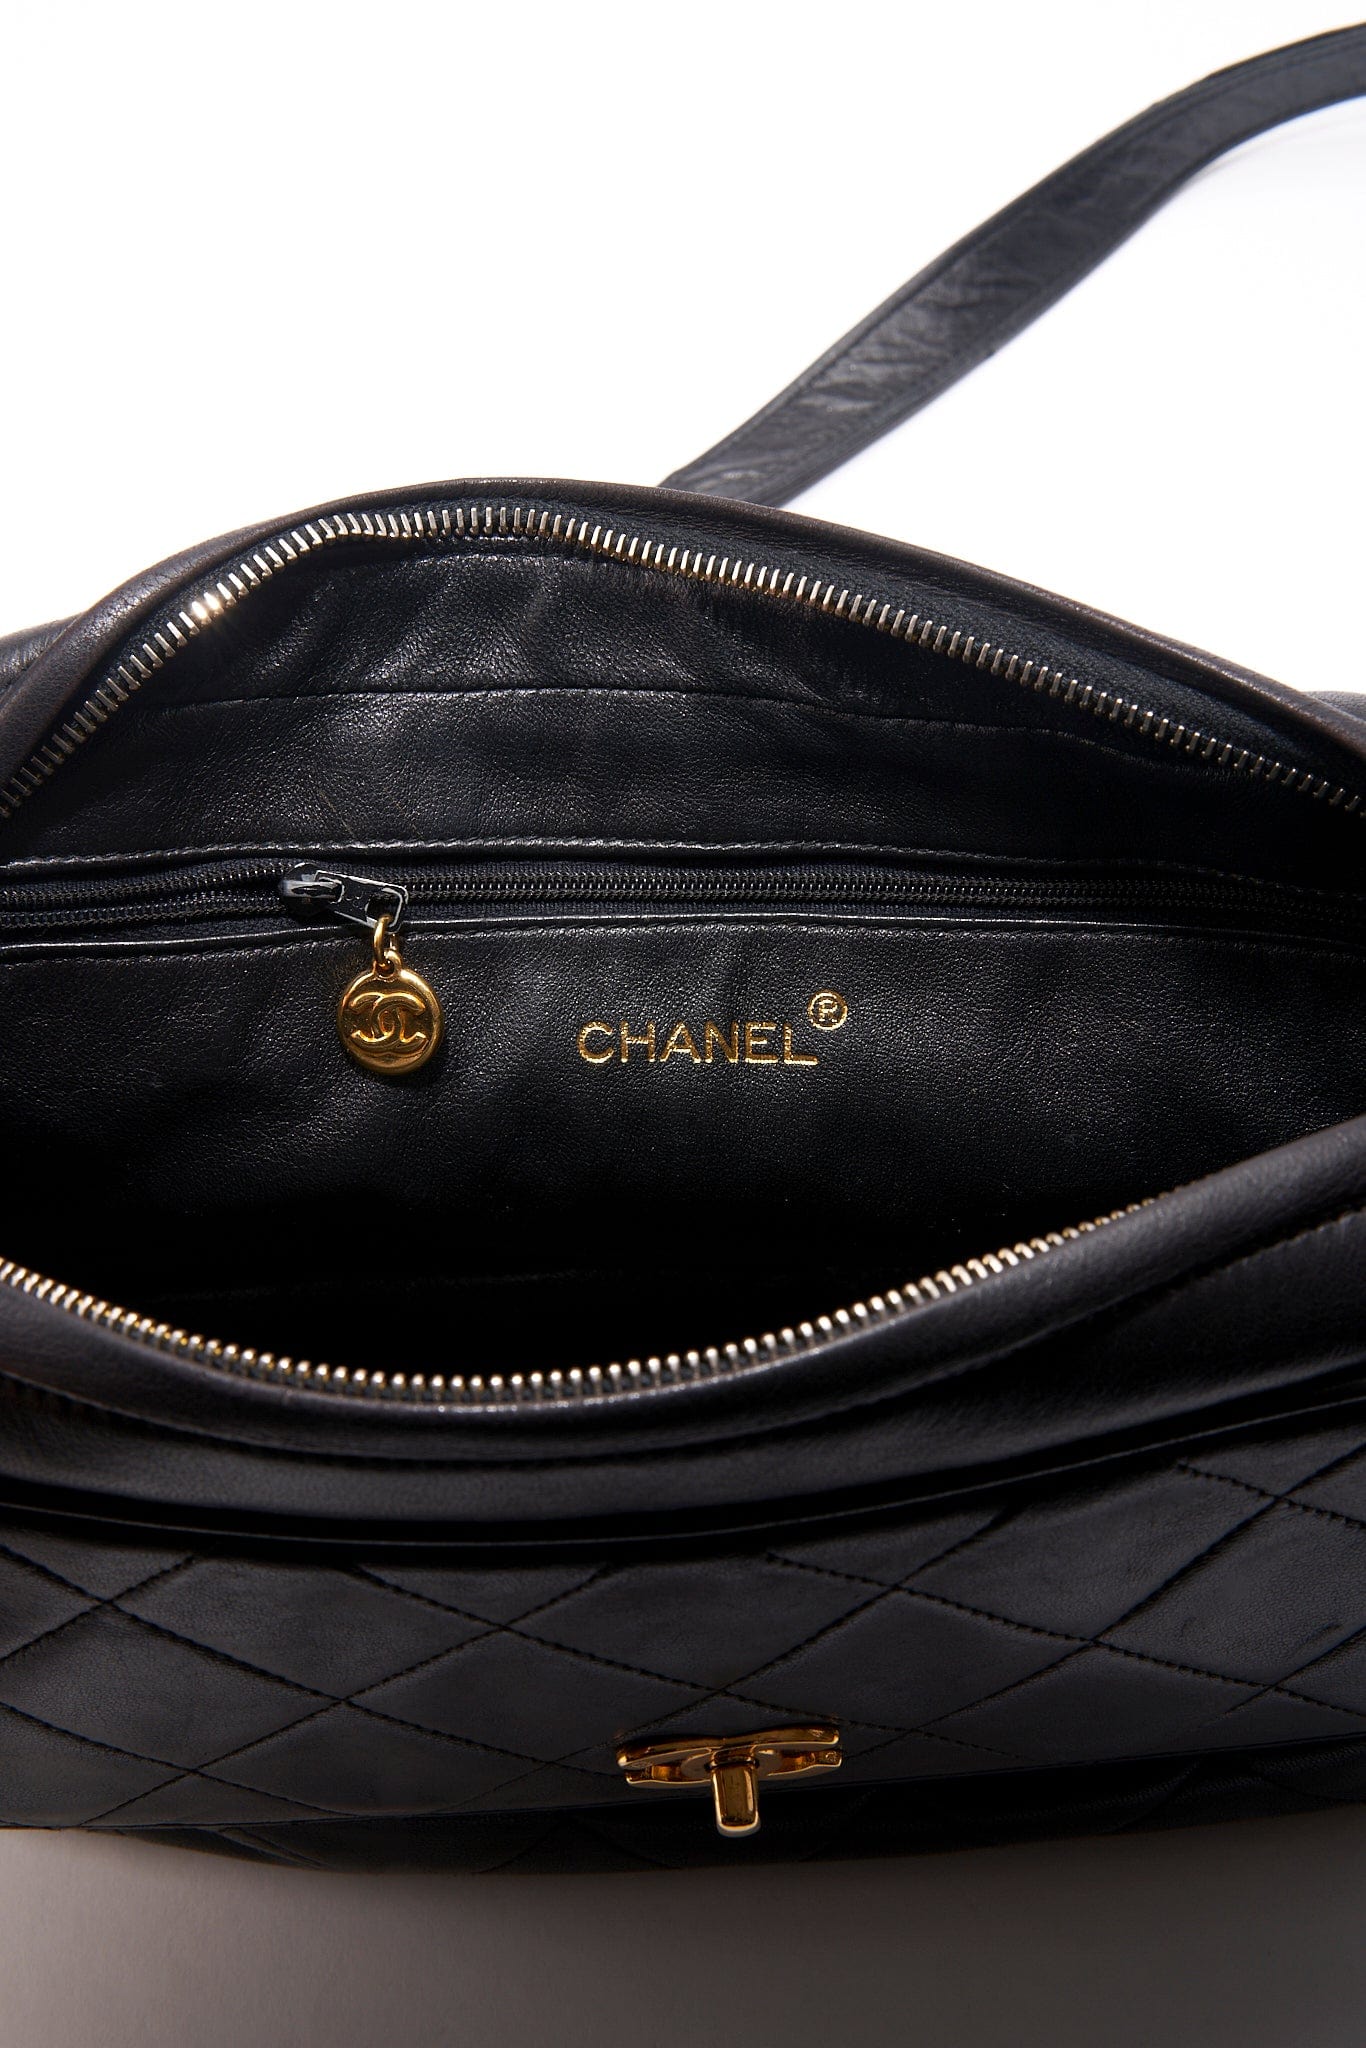 Chanel Quilted Black Camera Crossbody Bag